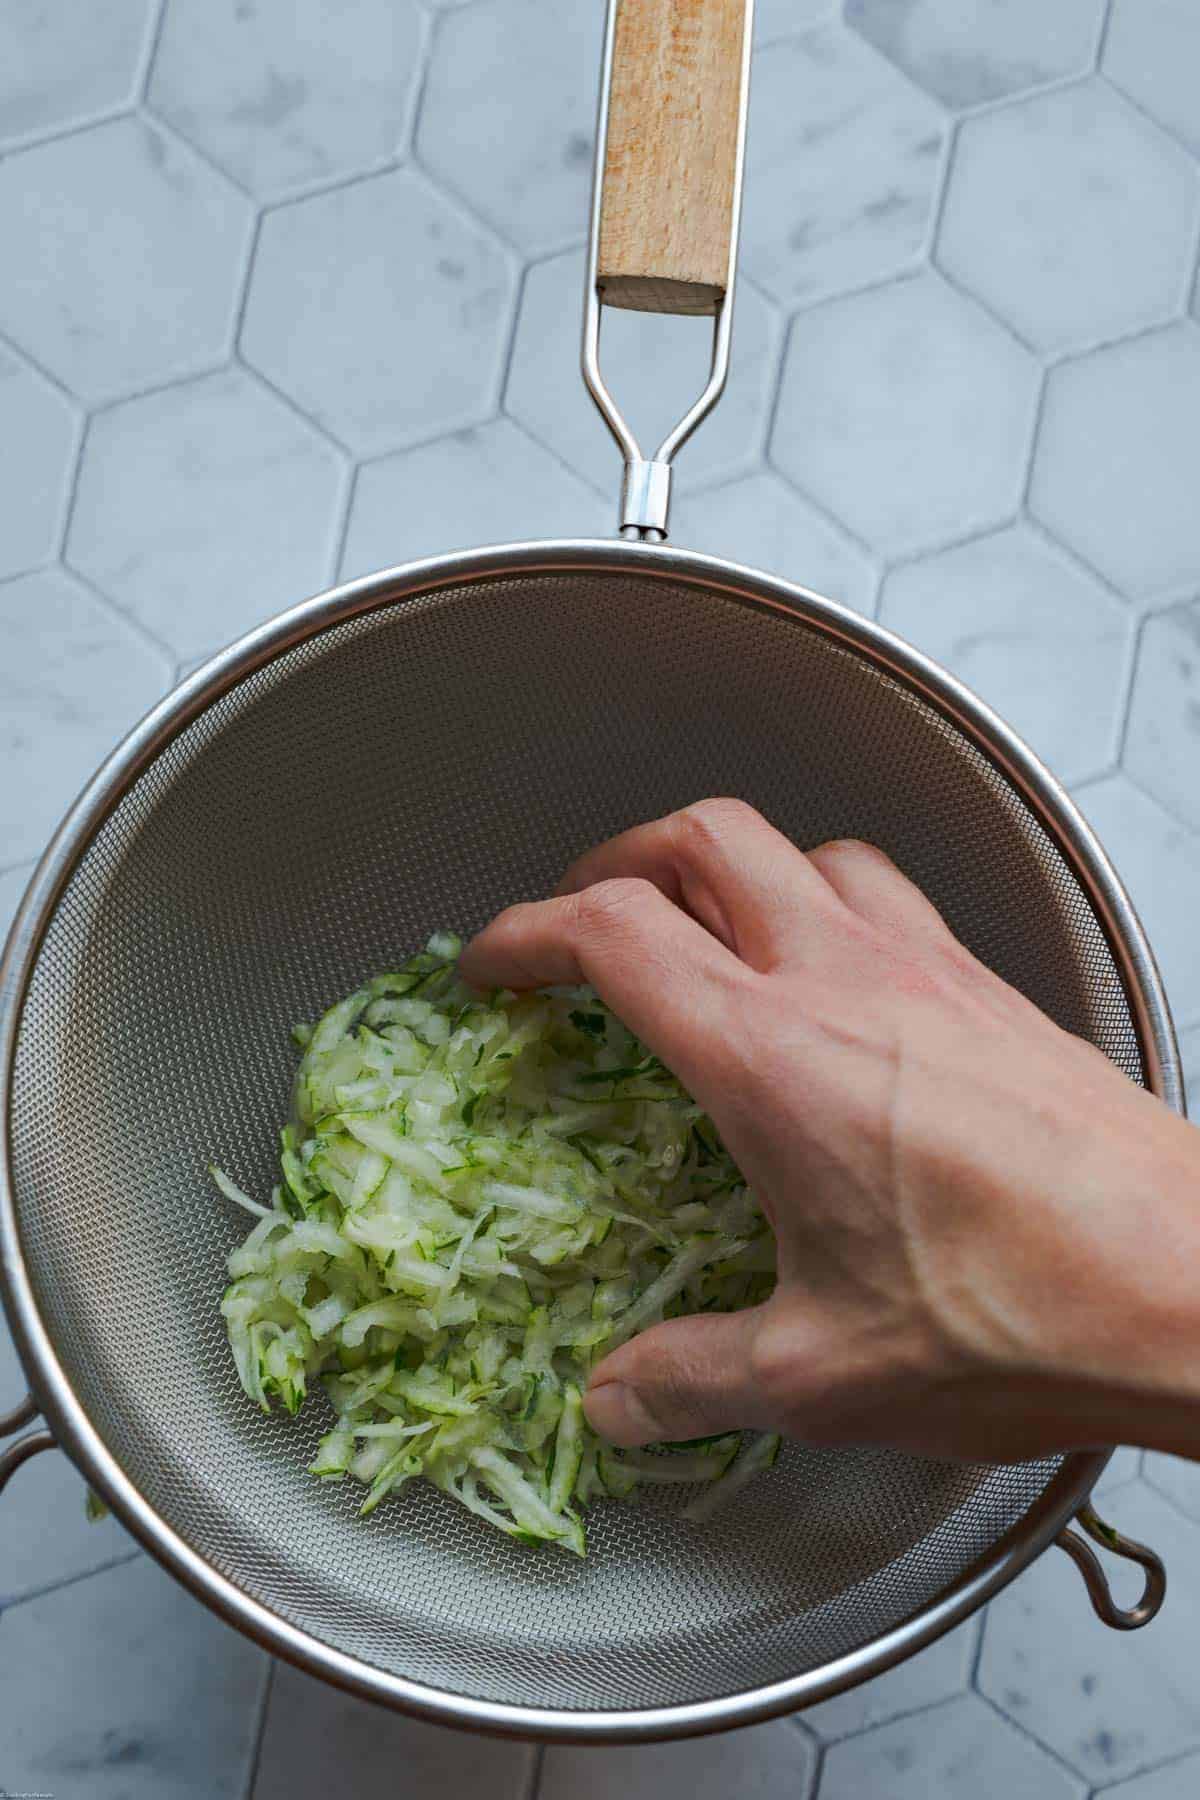 Grated zucchini in a large sieve over a bowl.